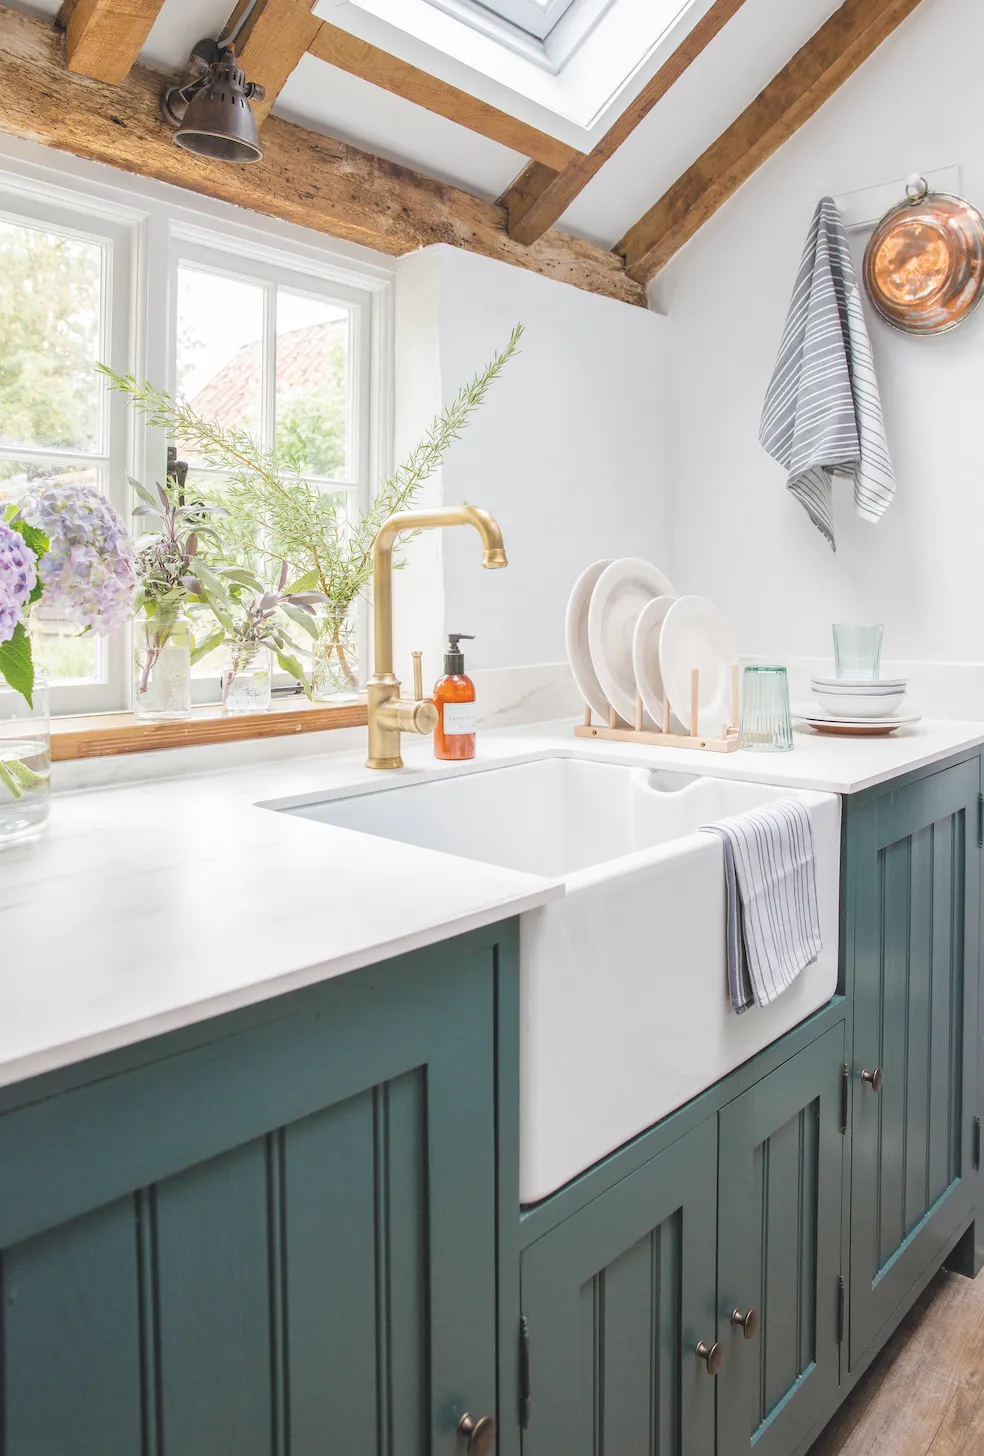 Kitchen makeover: 'We saved money by using what we had'